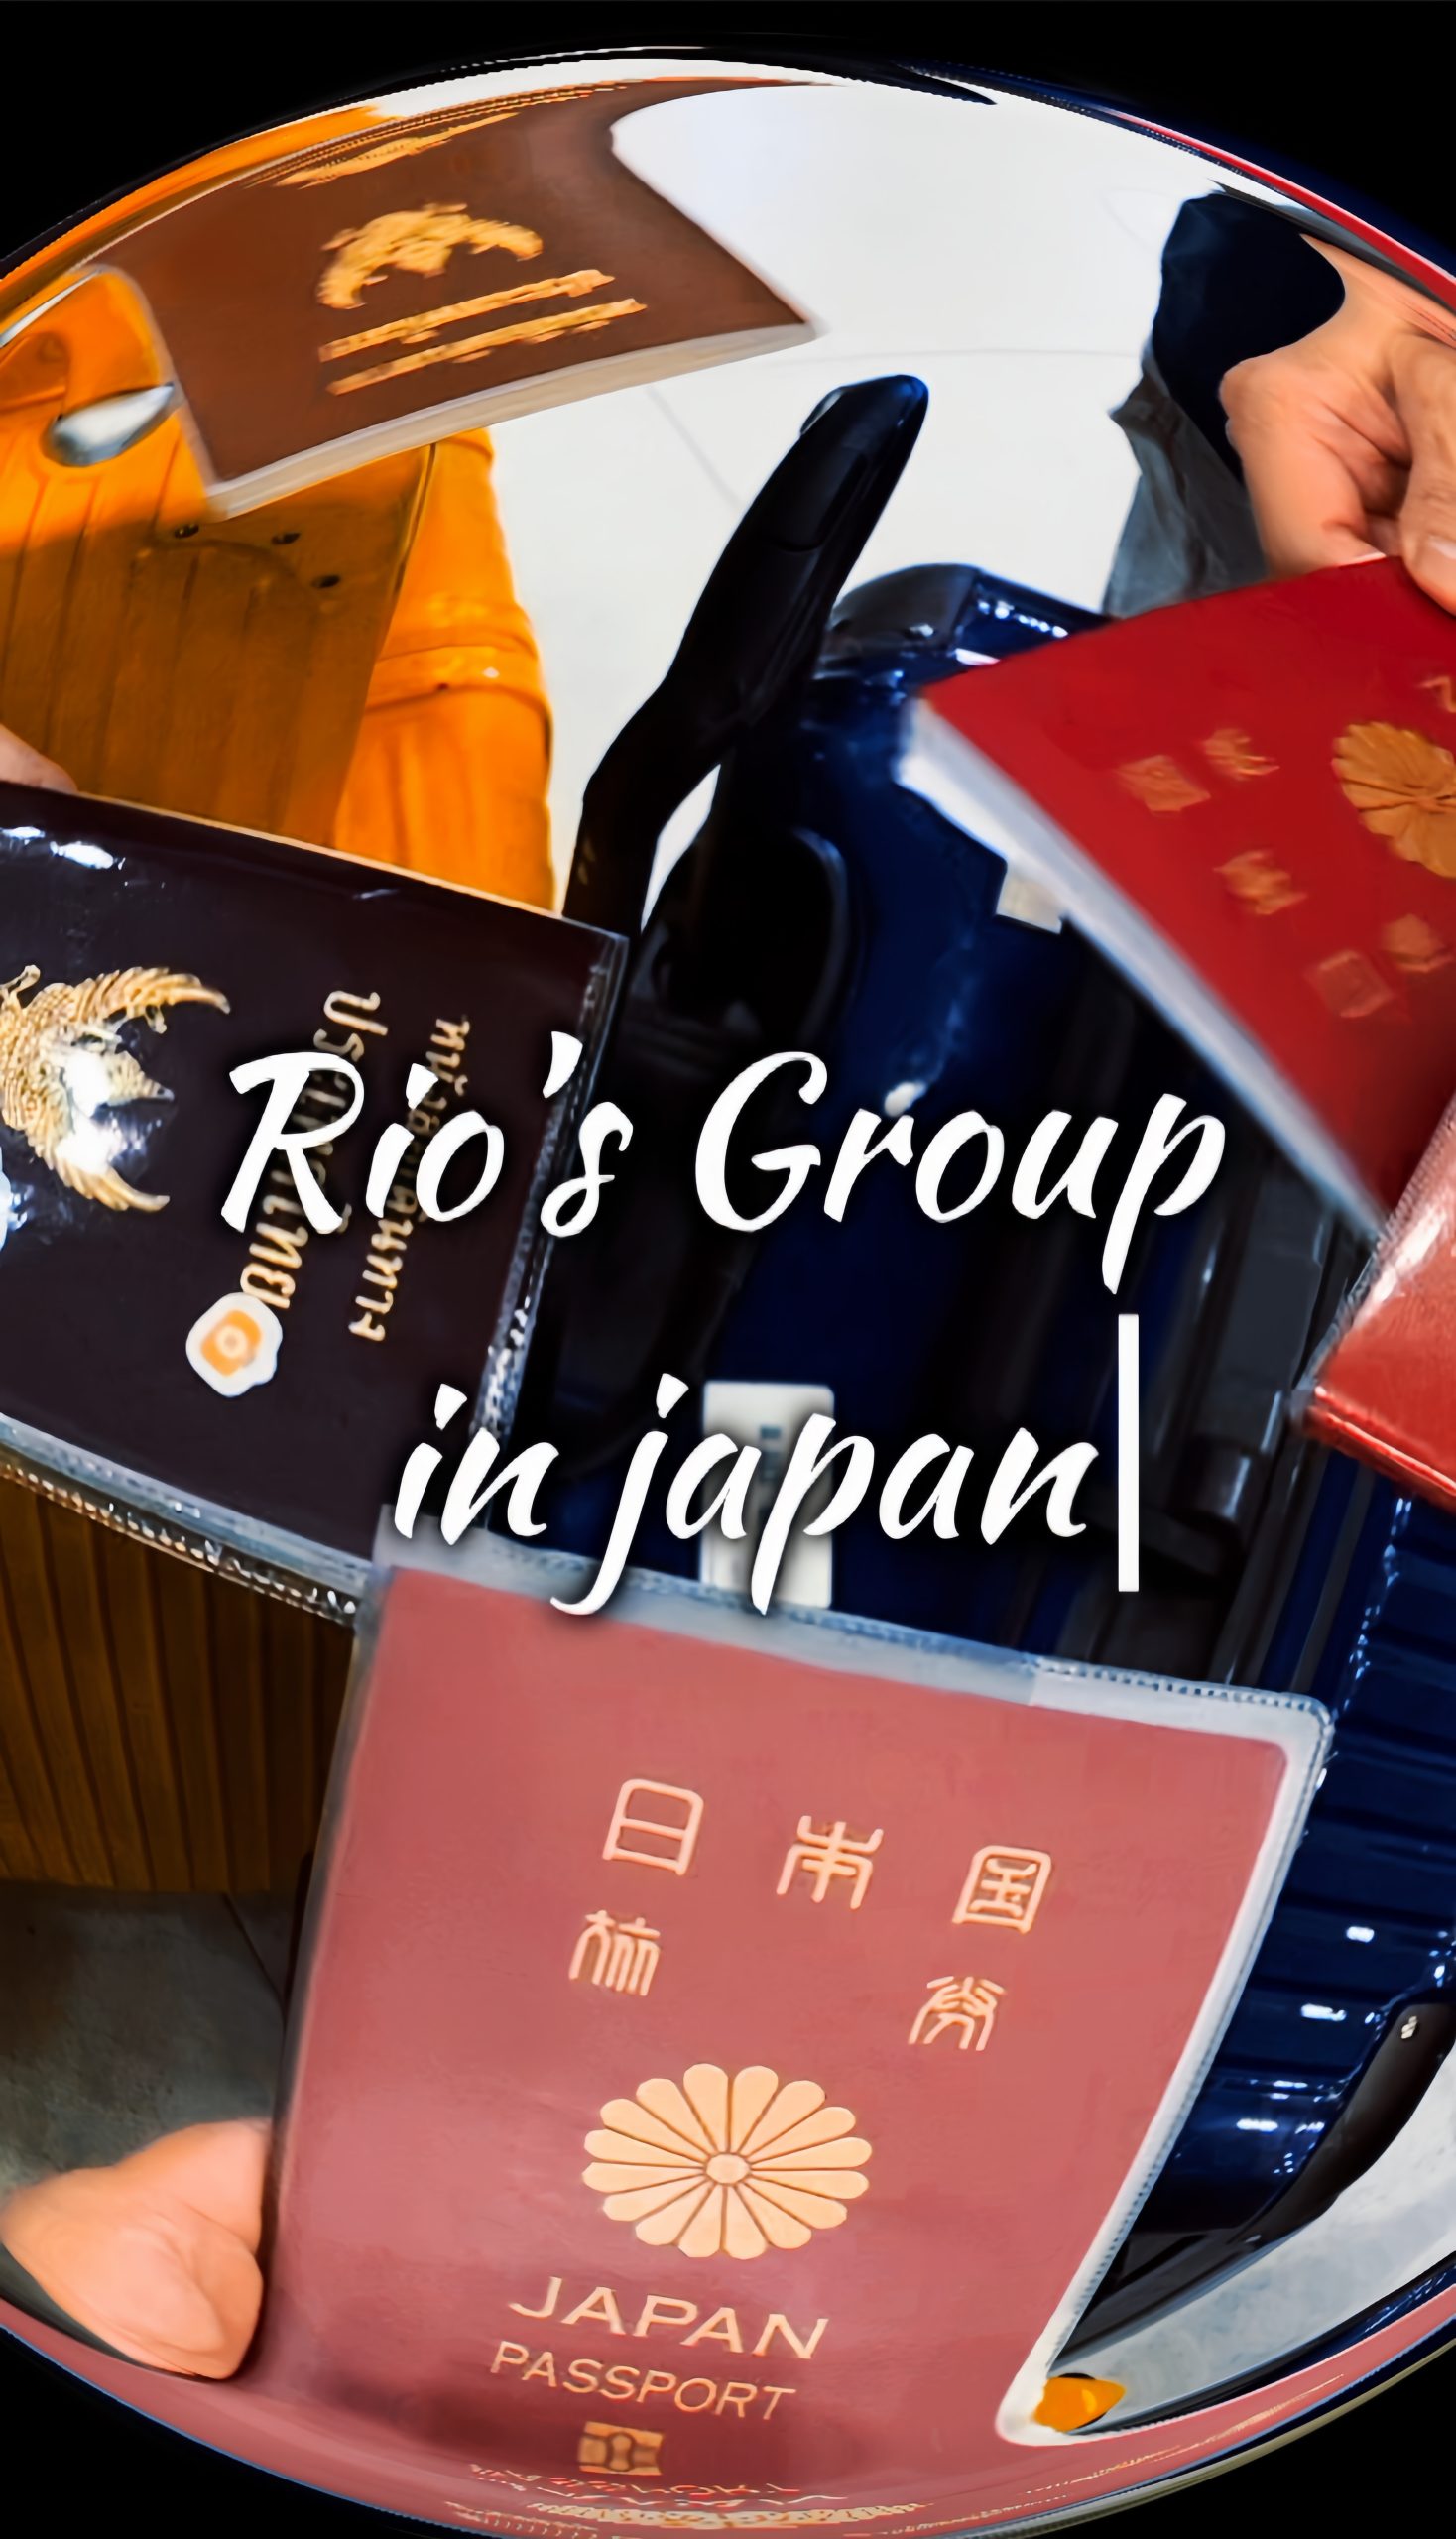 Rio's group in Japan 🌸✈️ By Rio's group